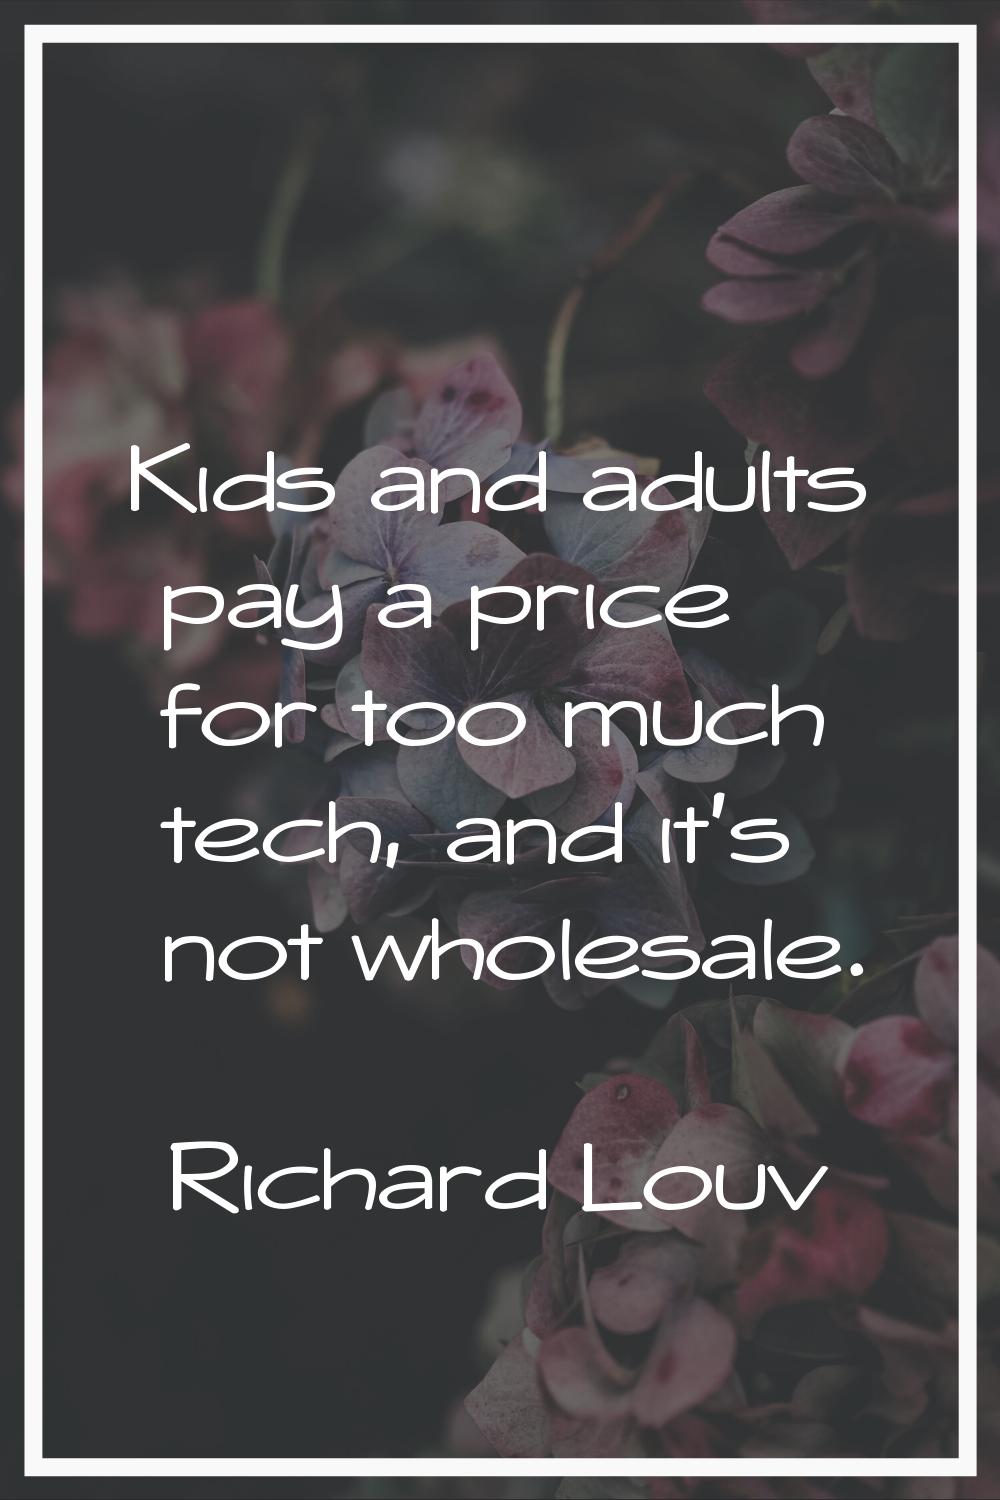 Kids and adults pay a price for too much tech, and it's not wholesale.